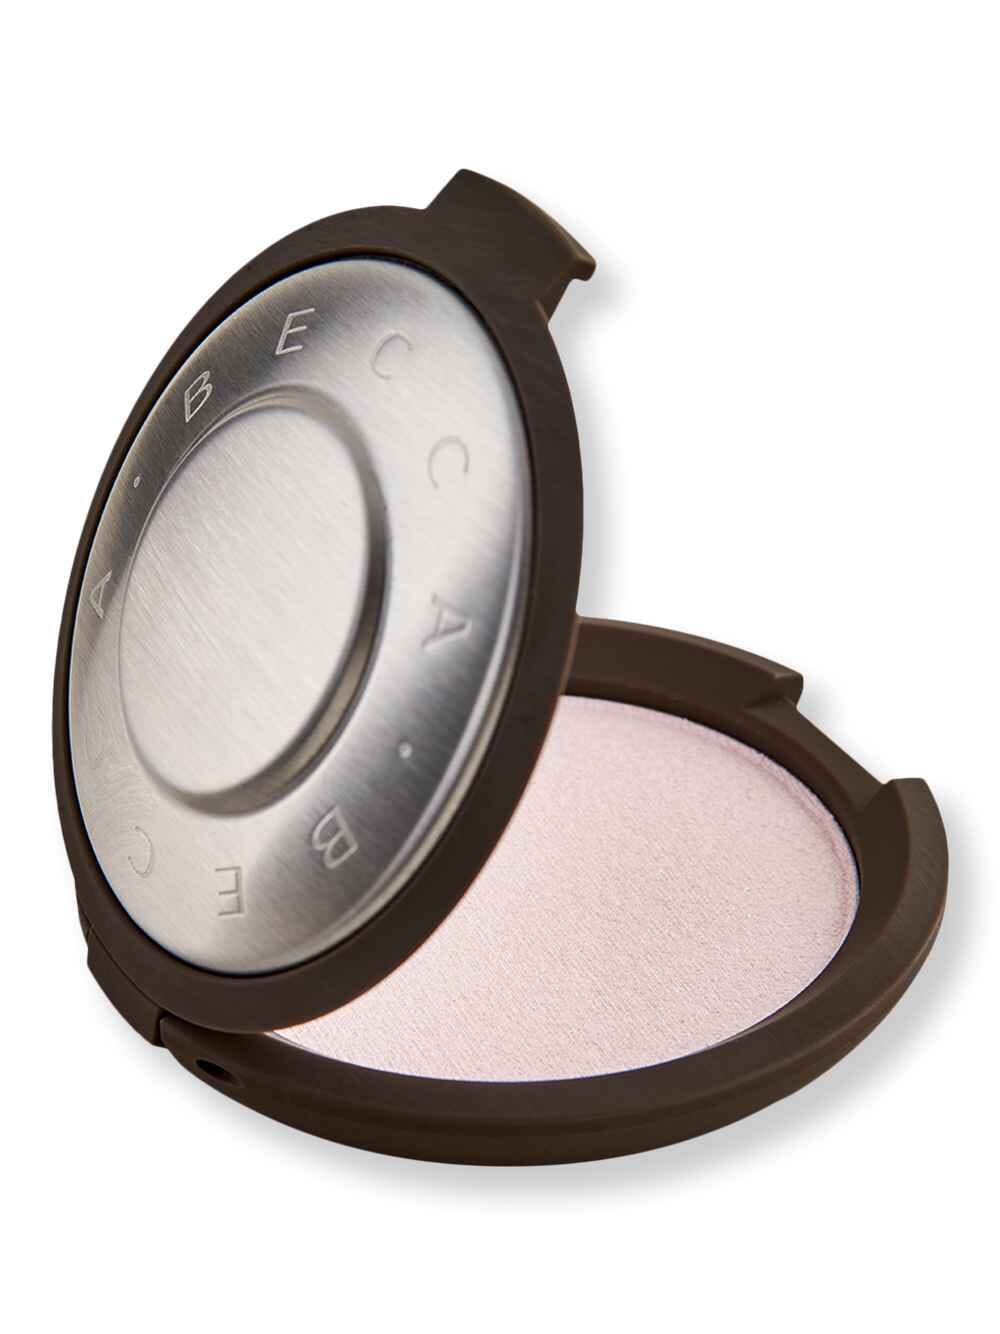 Becca Becca Shimmering Skin Perfector Pressed Highlighter Prismatic Amethyst Highlighters 